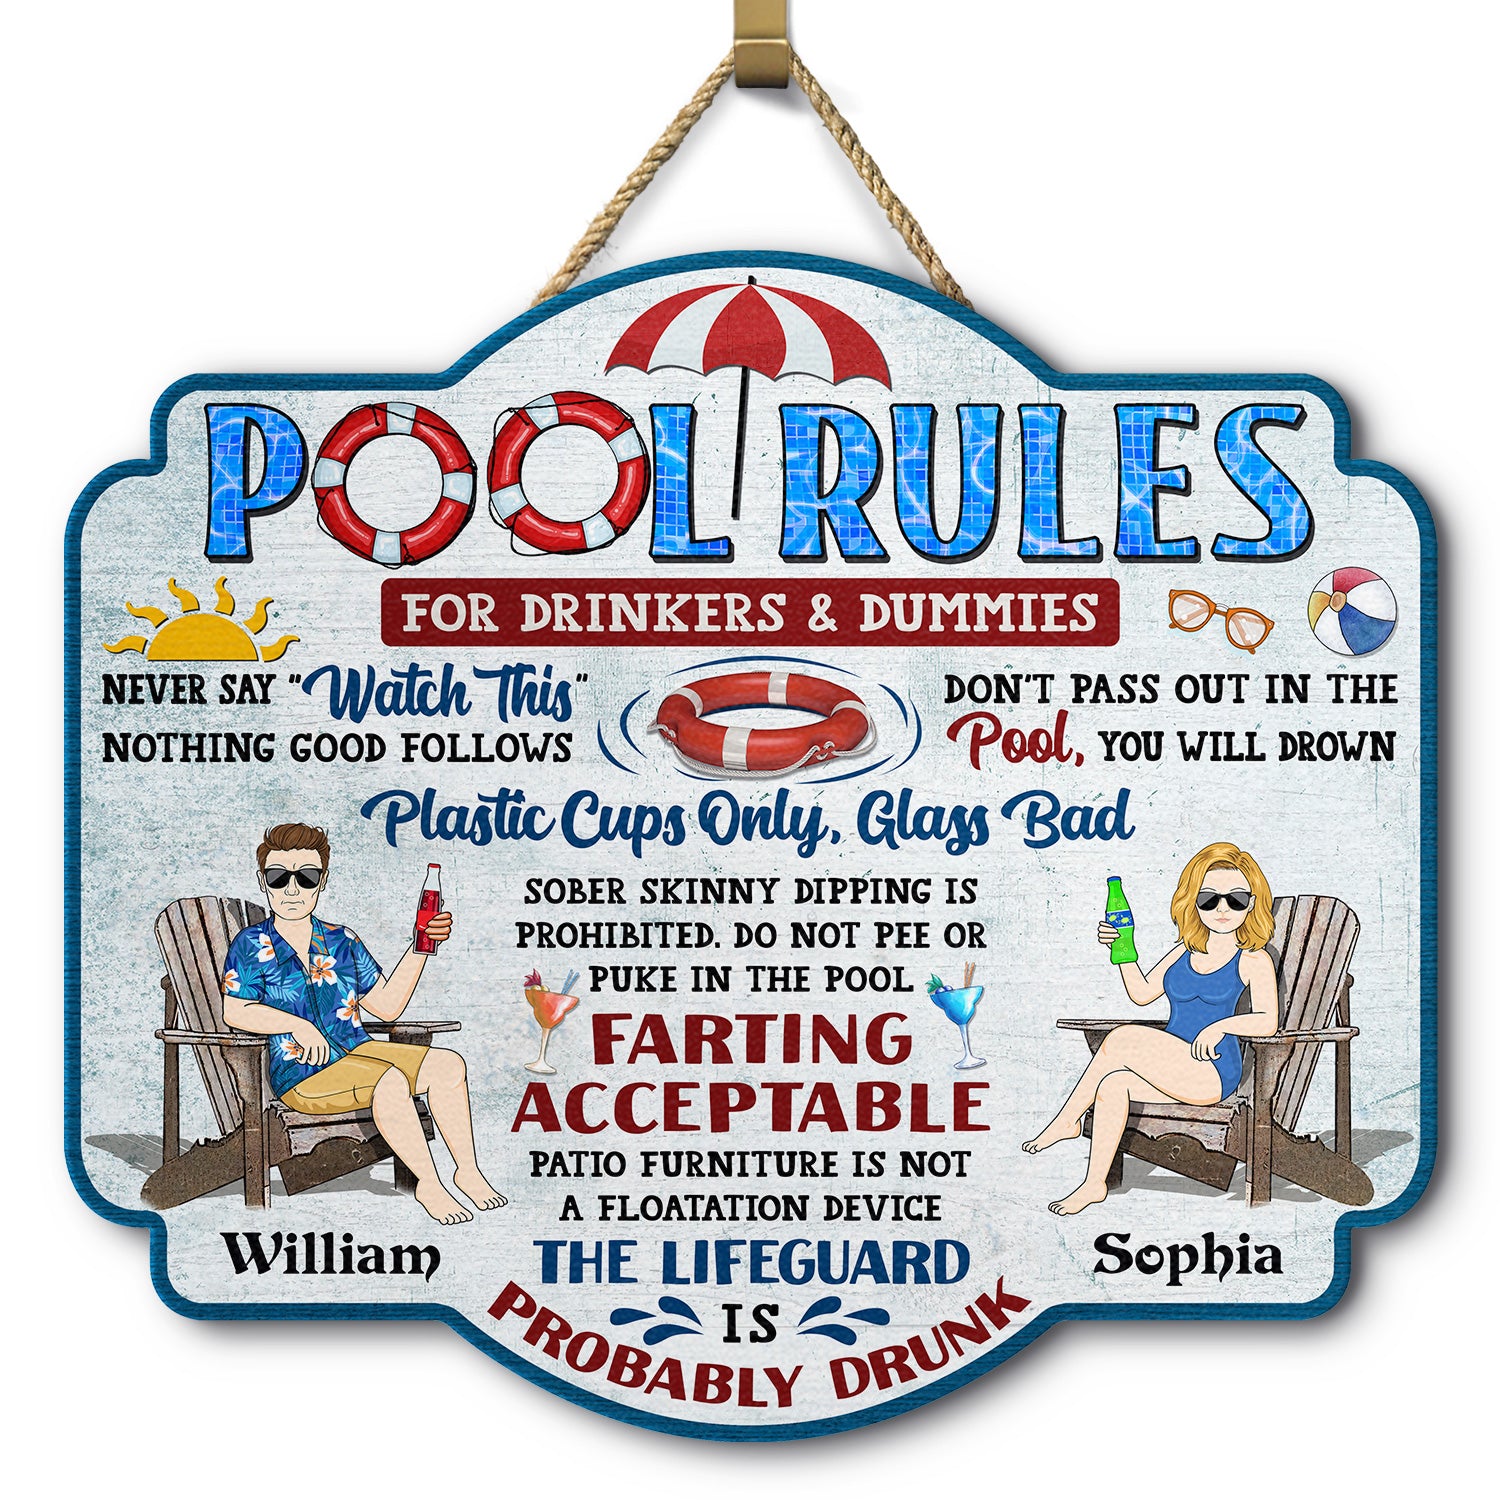 Pool Rules For Drinkers And Dummies - Home Decor, Backyard Decor, Gift For Her, Him, Family, Couples, Husband, Wife - Personalized Custom Shaped Wood Sign